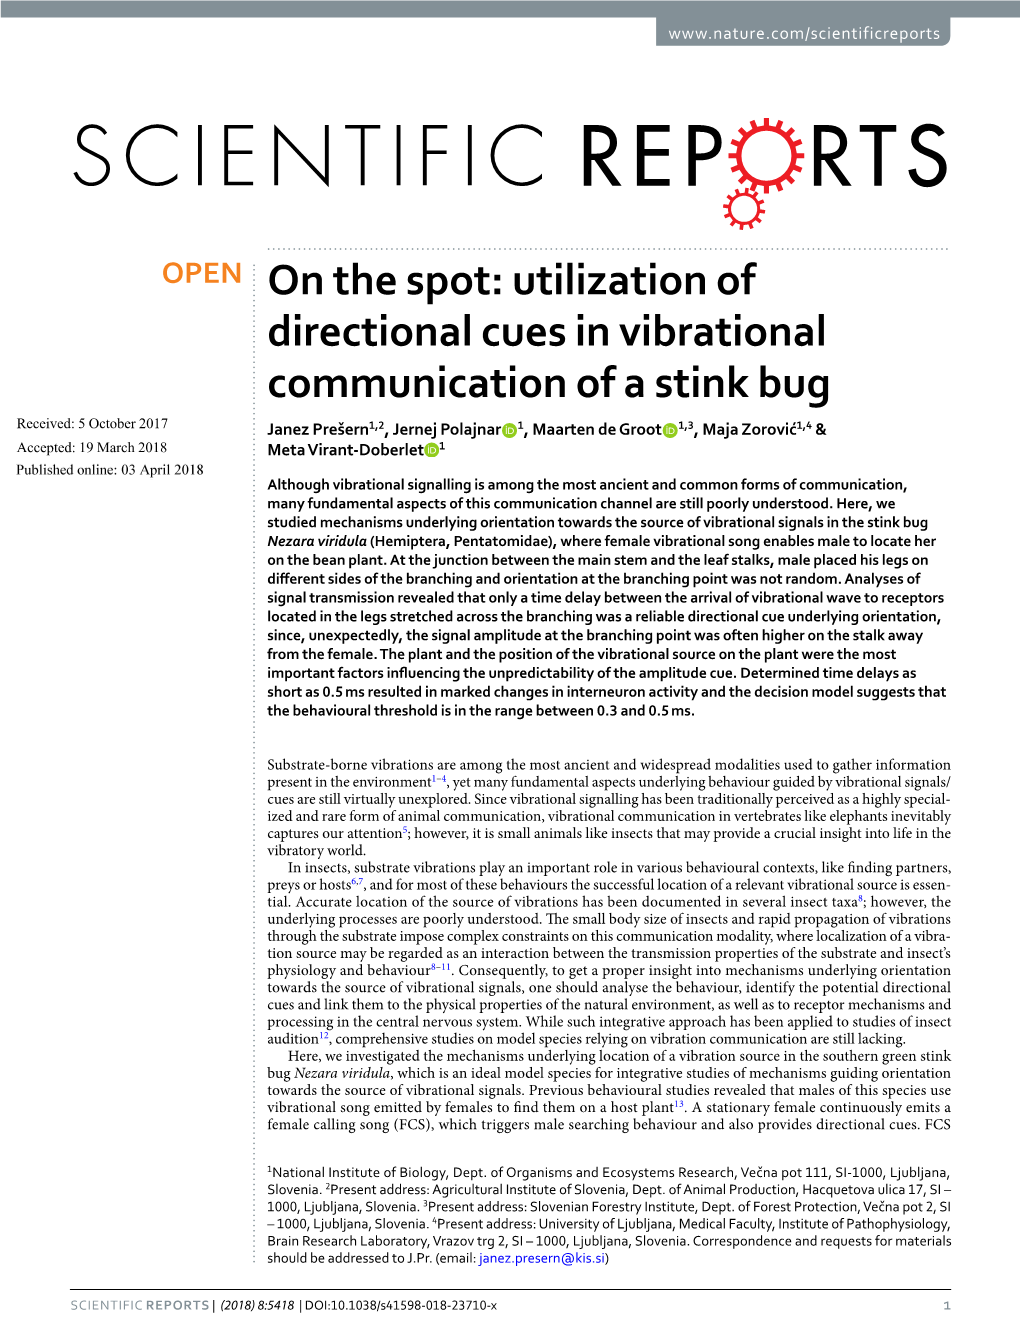 Utilization of Directional Cues in Vibrational Communication